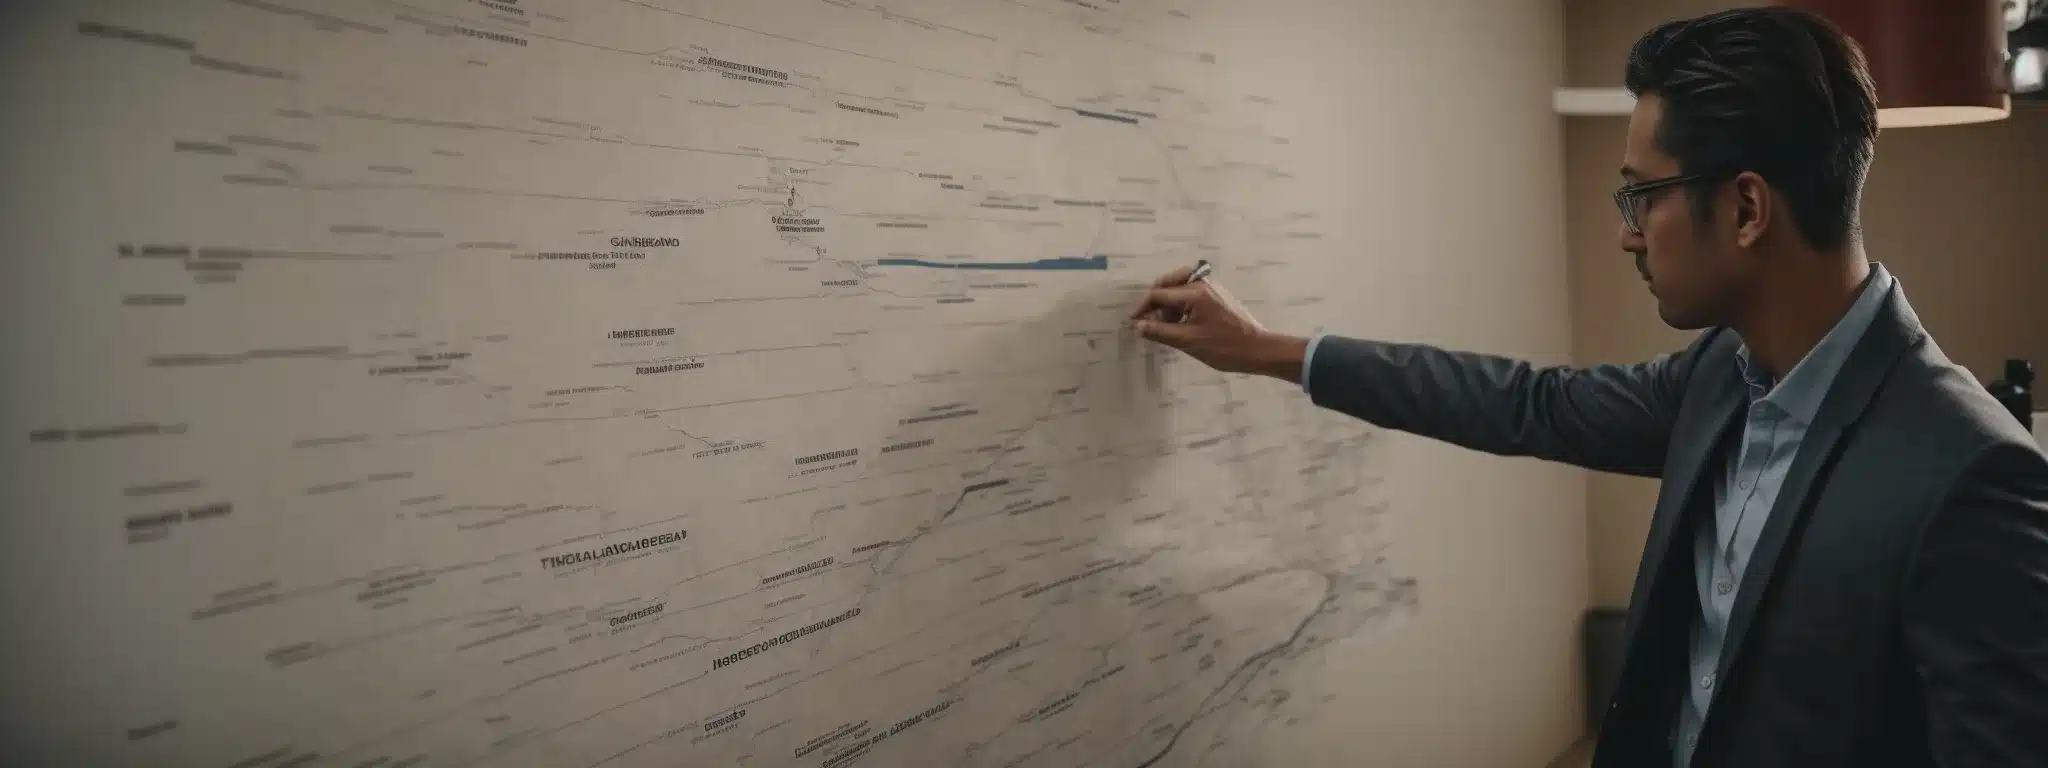 A Strategist Plots A Branding Roadmap On A Wall, Illustrating A Journey From Conception To Market Resonance.